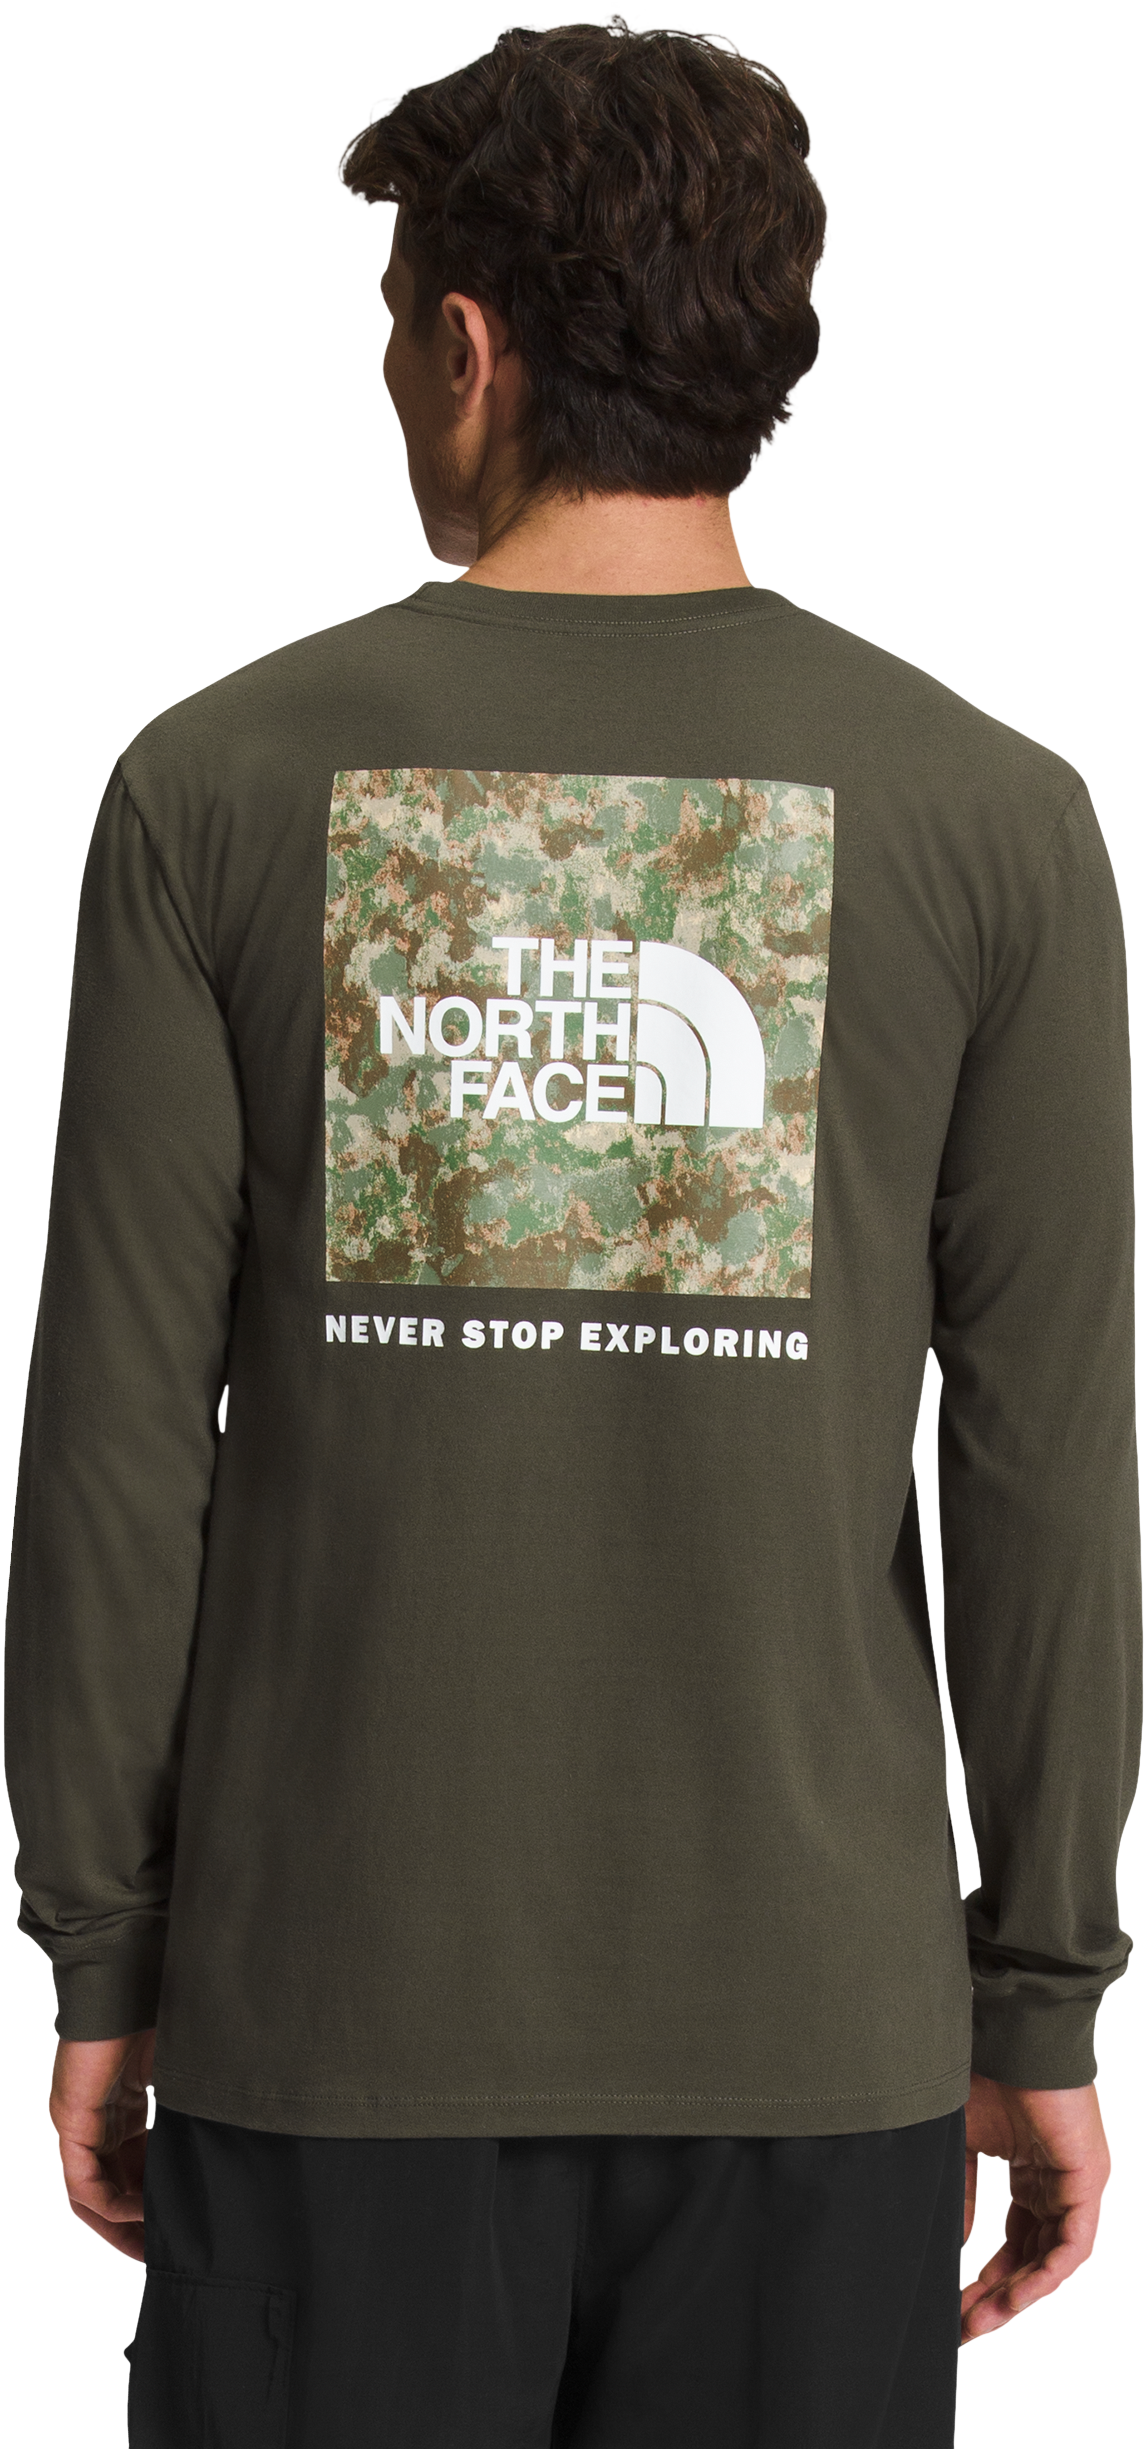 The North Face Box NSE Long-Sleeve Shirt for Men - New Taupe Green/Military Olive - L